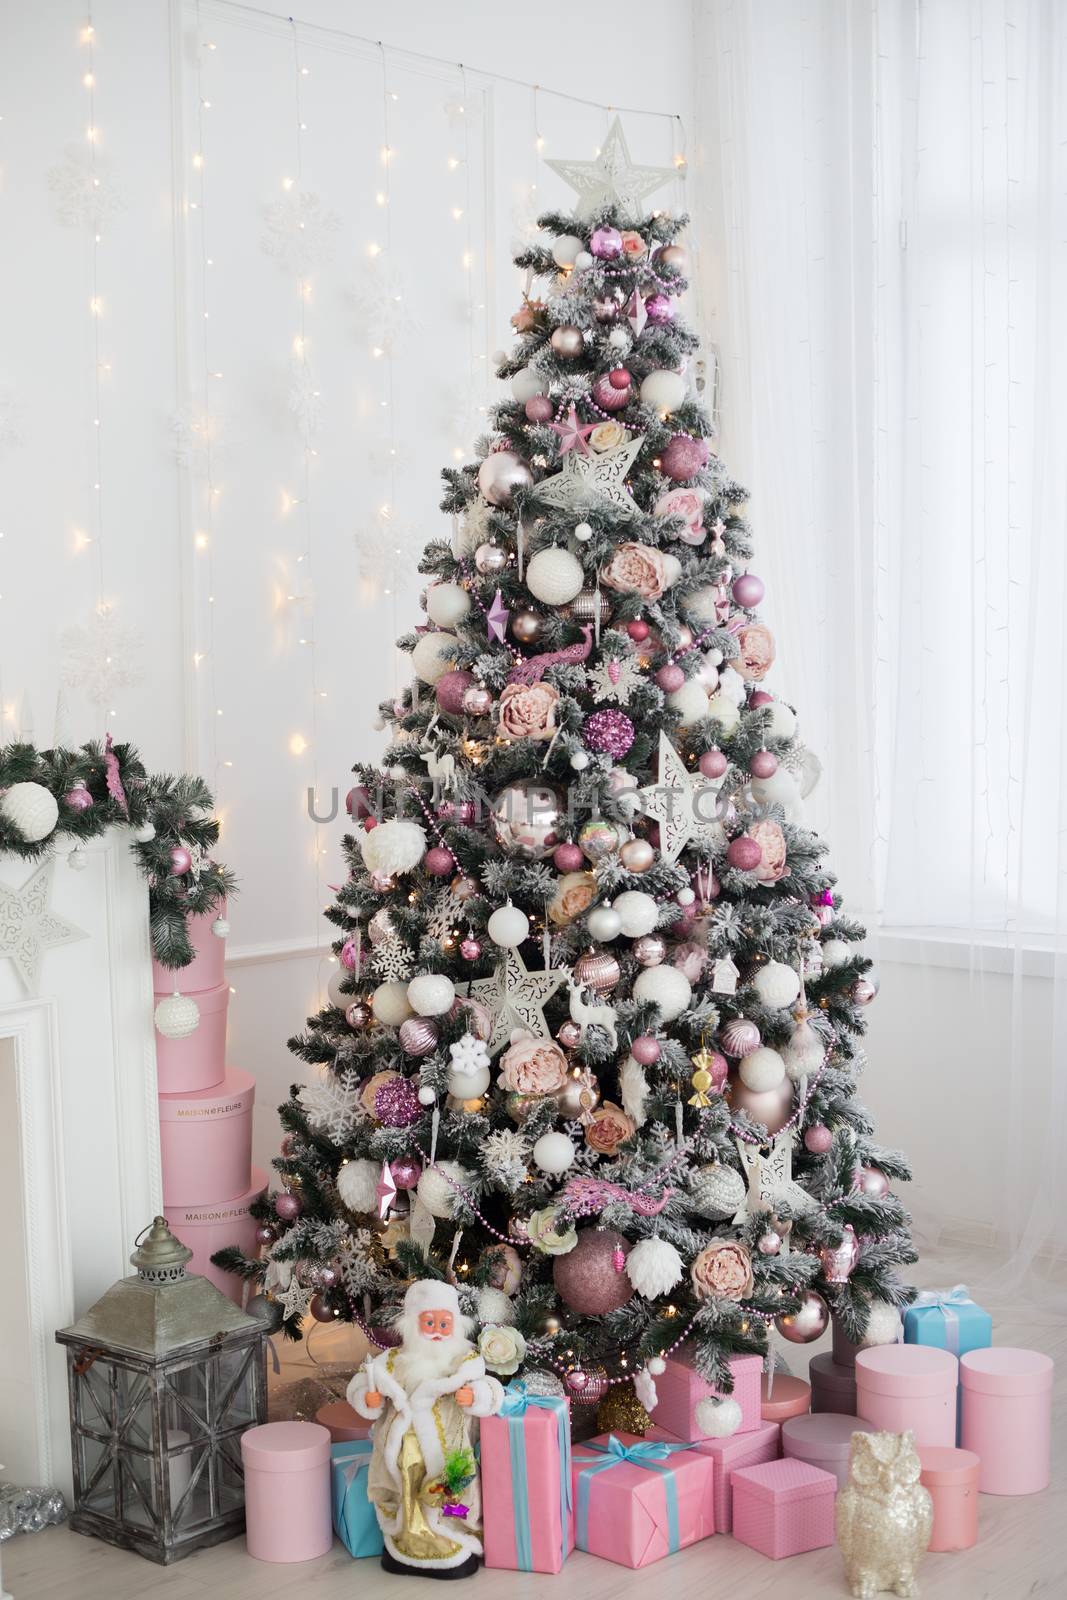 Green and White Christmas tree with pink toys new year winter gifts decor by galinasharapova